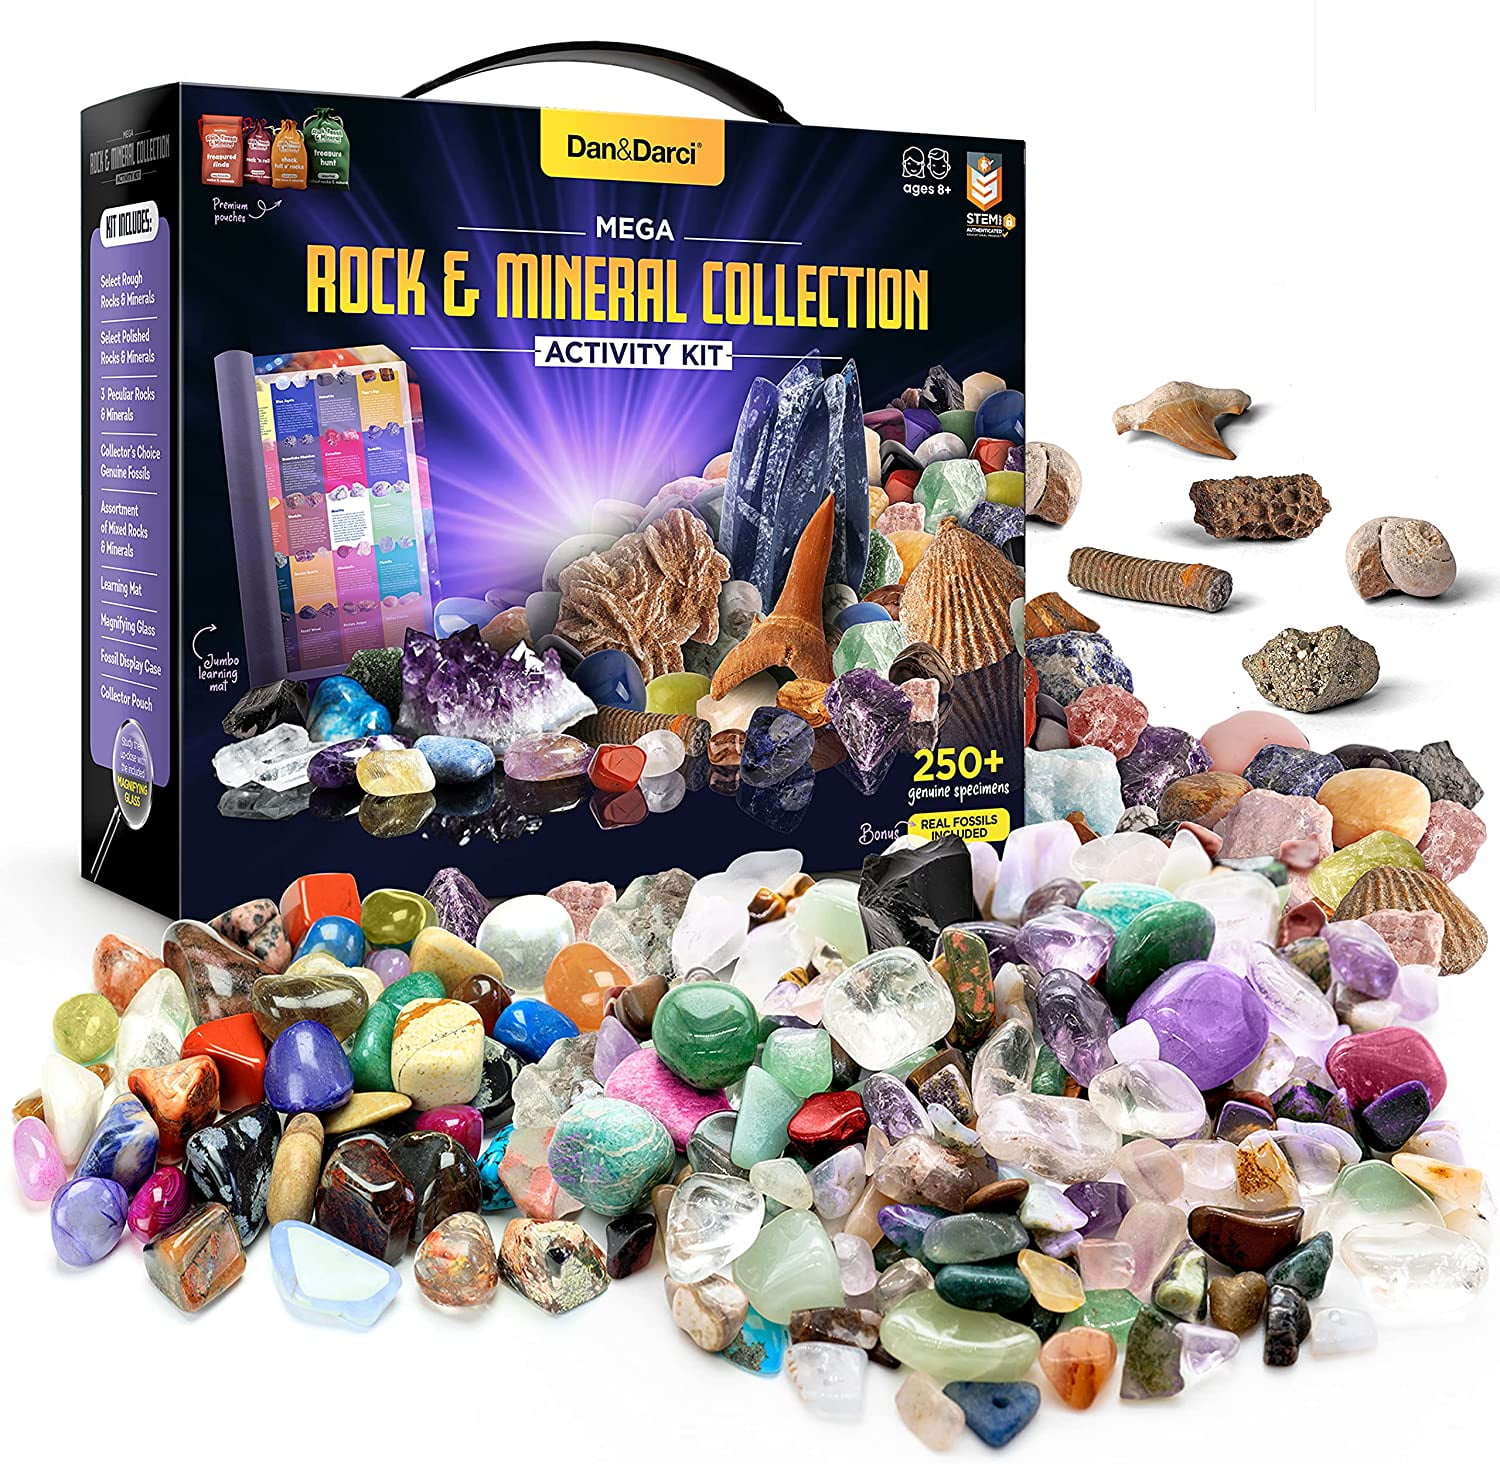 How to Manage a Mineral Collection